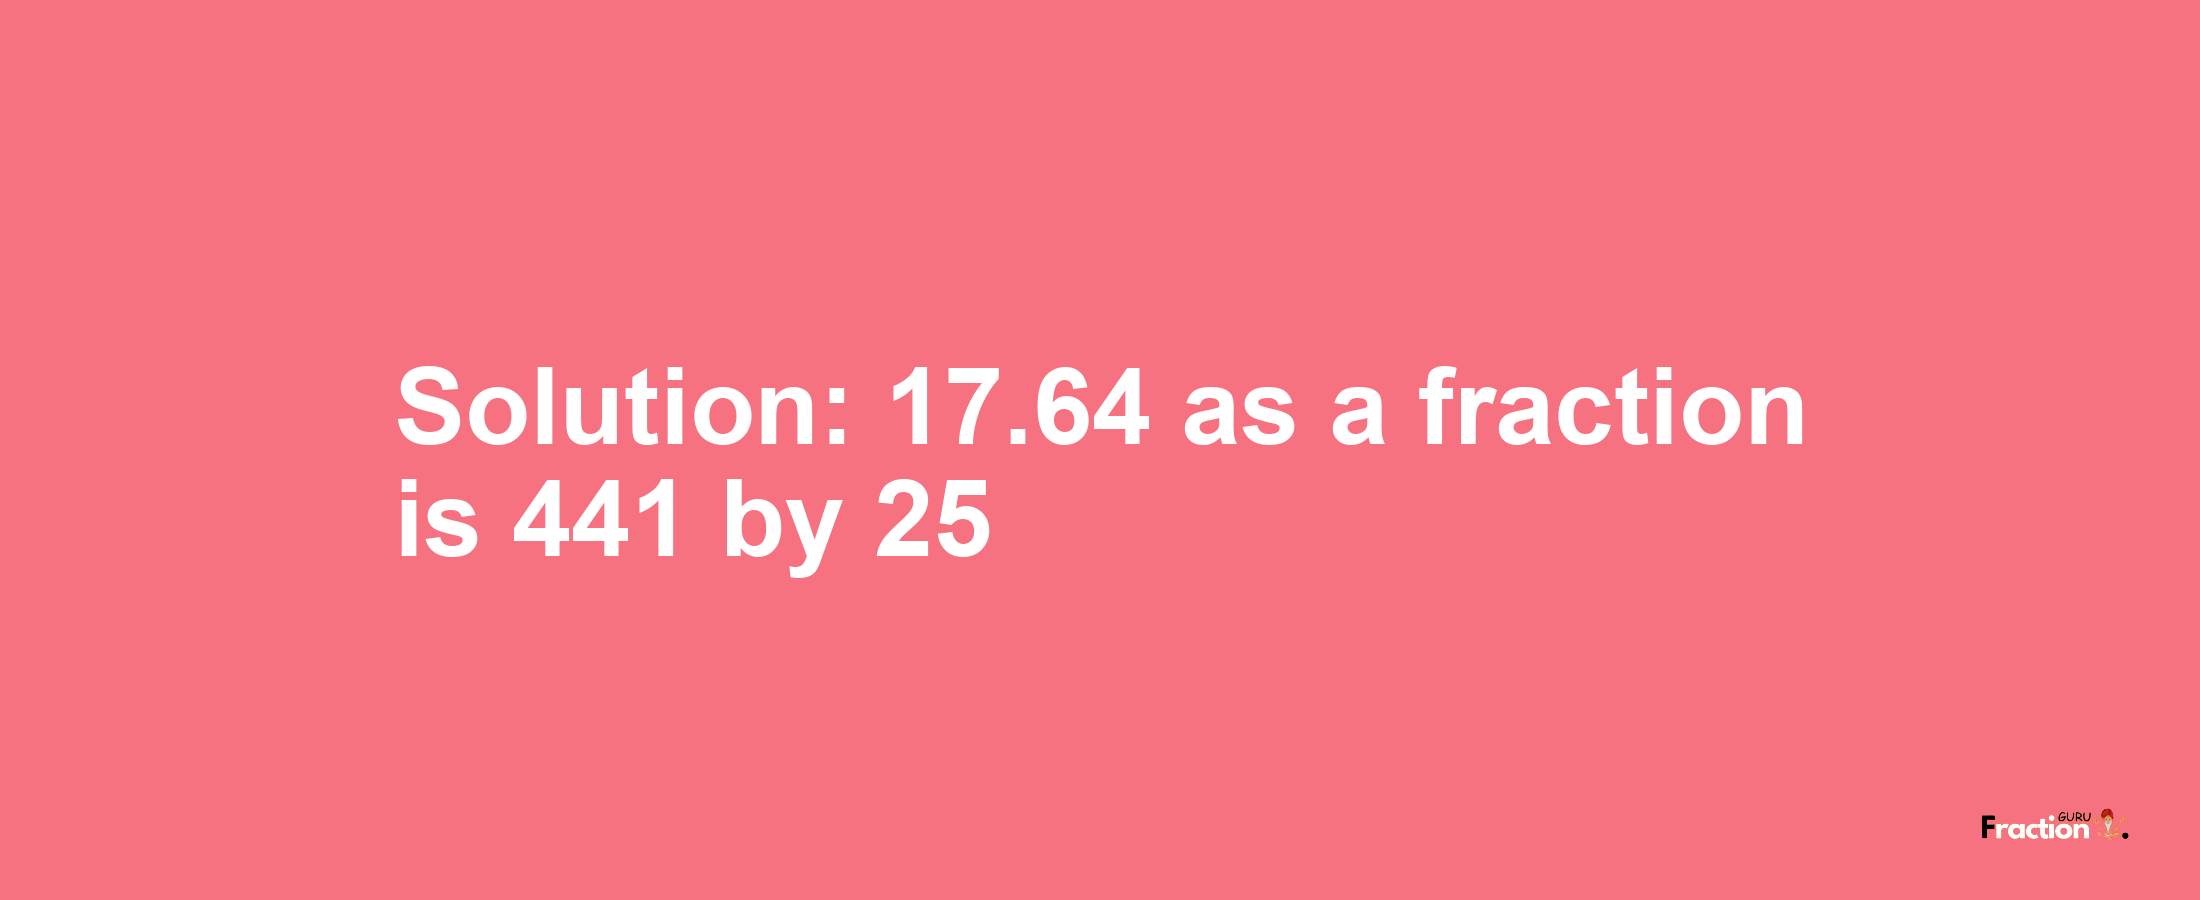 Solution:17.64 as a fraction is 441/25